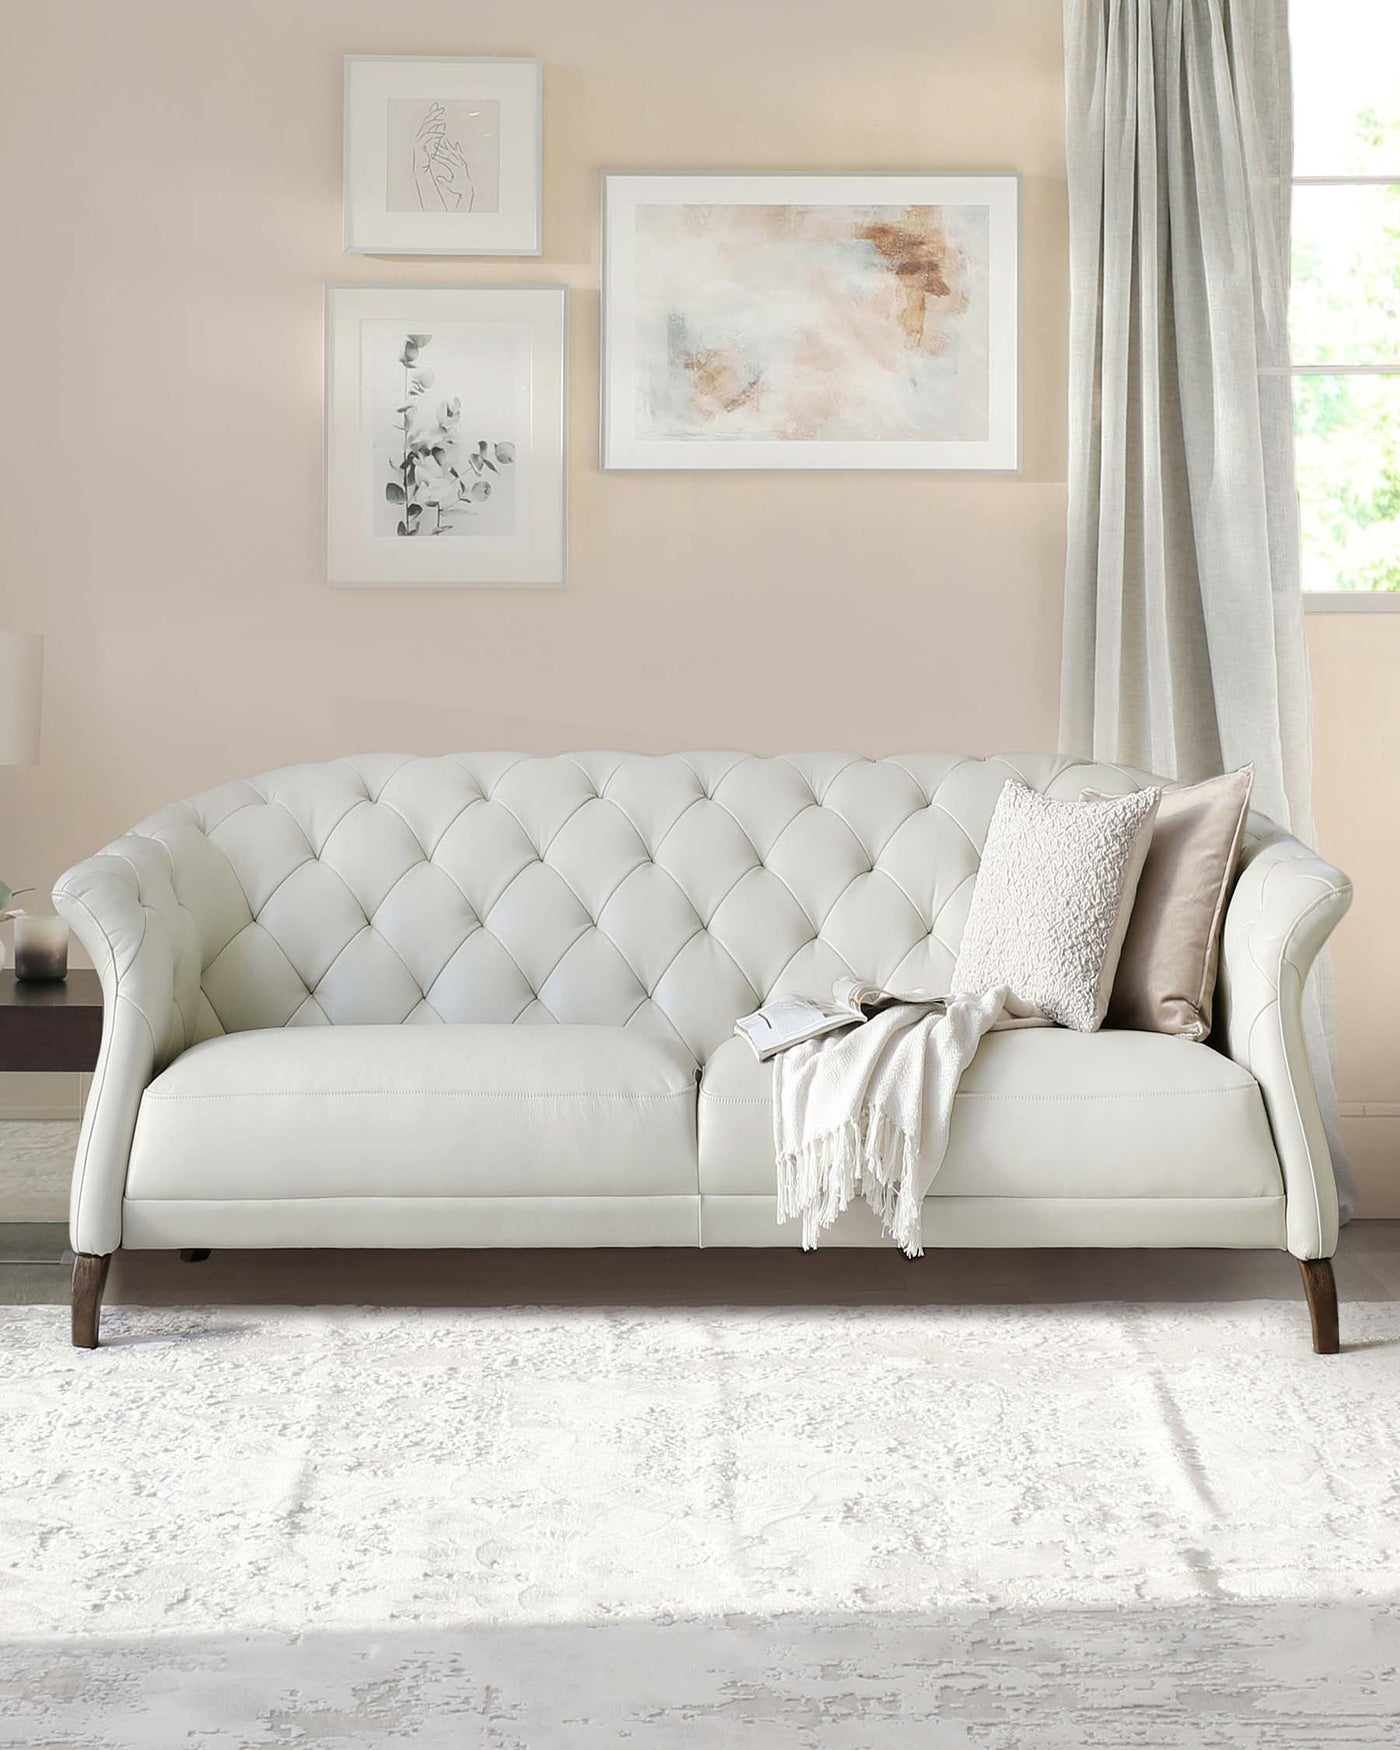 Elegant ivory tufted Chesterfield sofa with high rolled arms, adorned with a beige throw blanket and a textured decorative pillow, resting on dark wooden legs, set against a light-toned plush area rug.